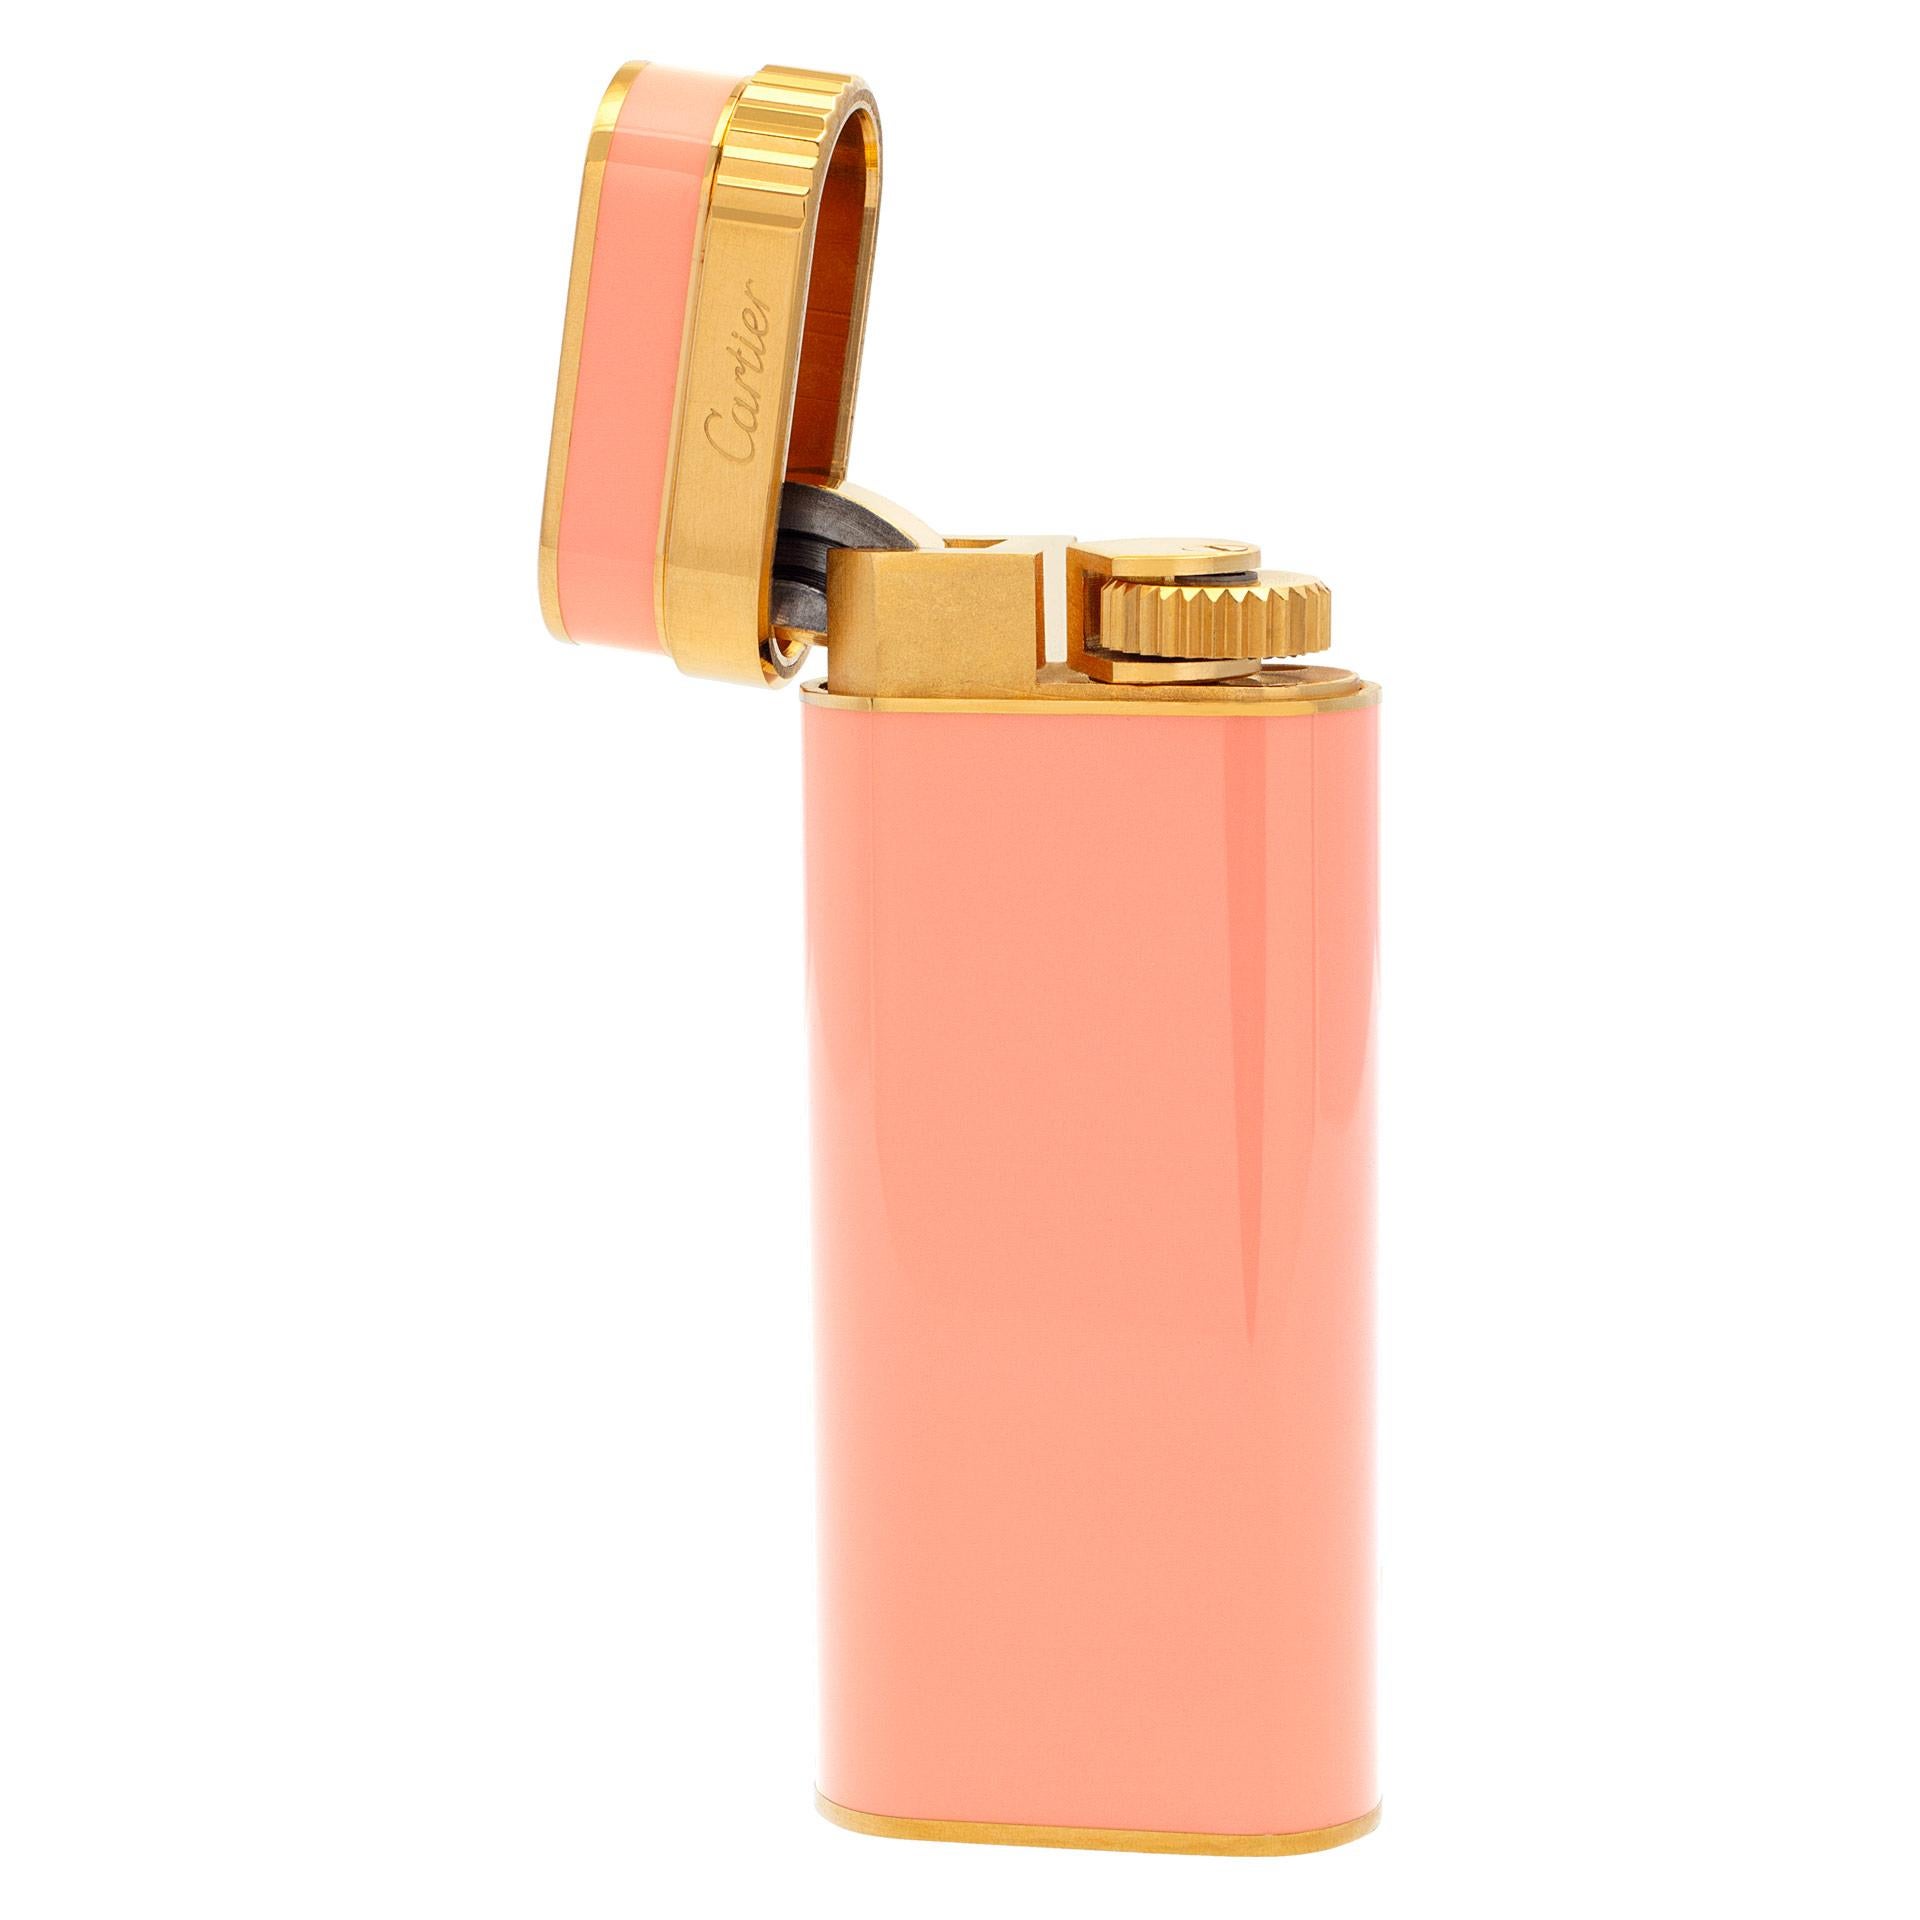 Cartier lighter in baby pink color. Great gift for a lady! Comes with pouch and service papers from Cartier dated 2019.
